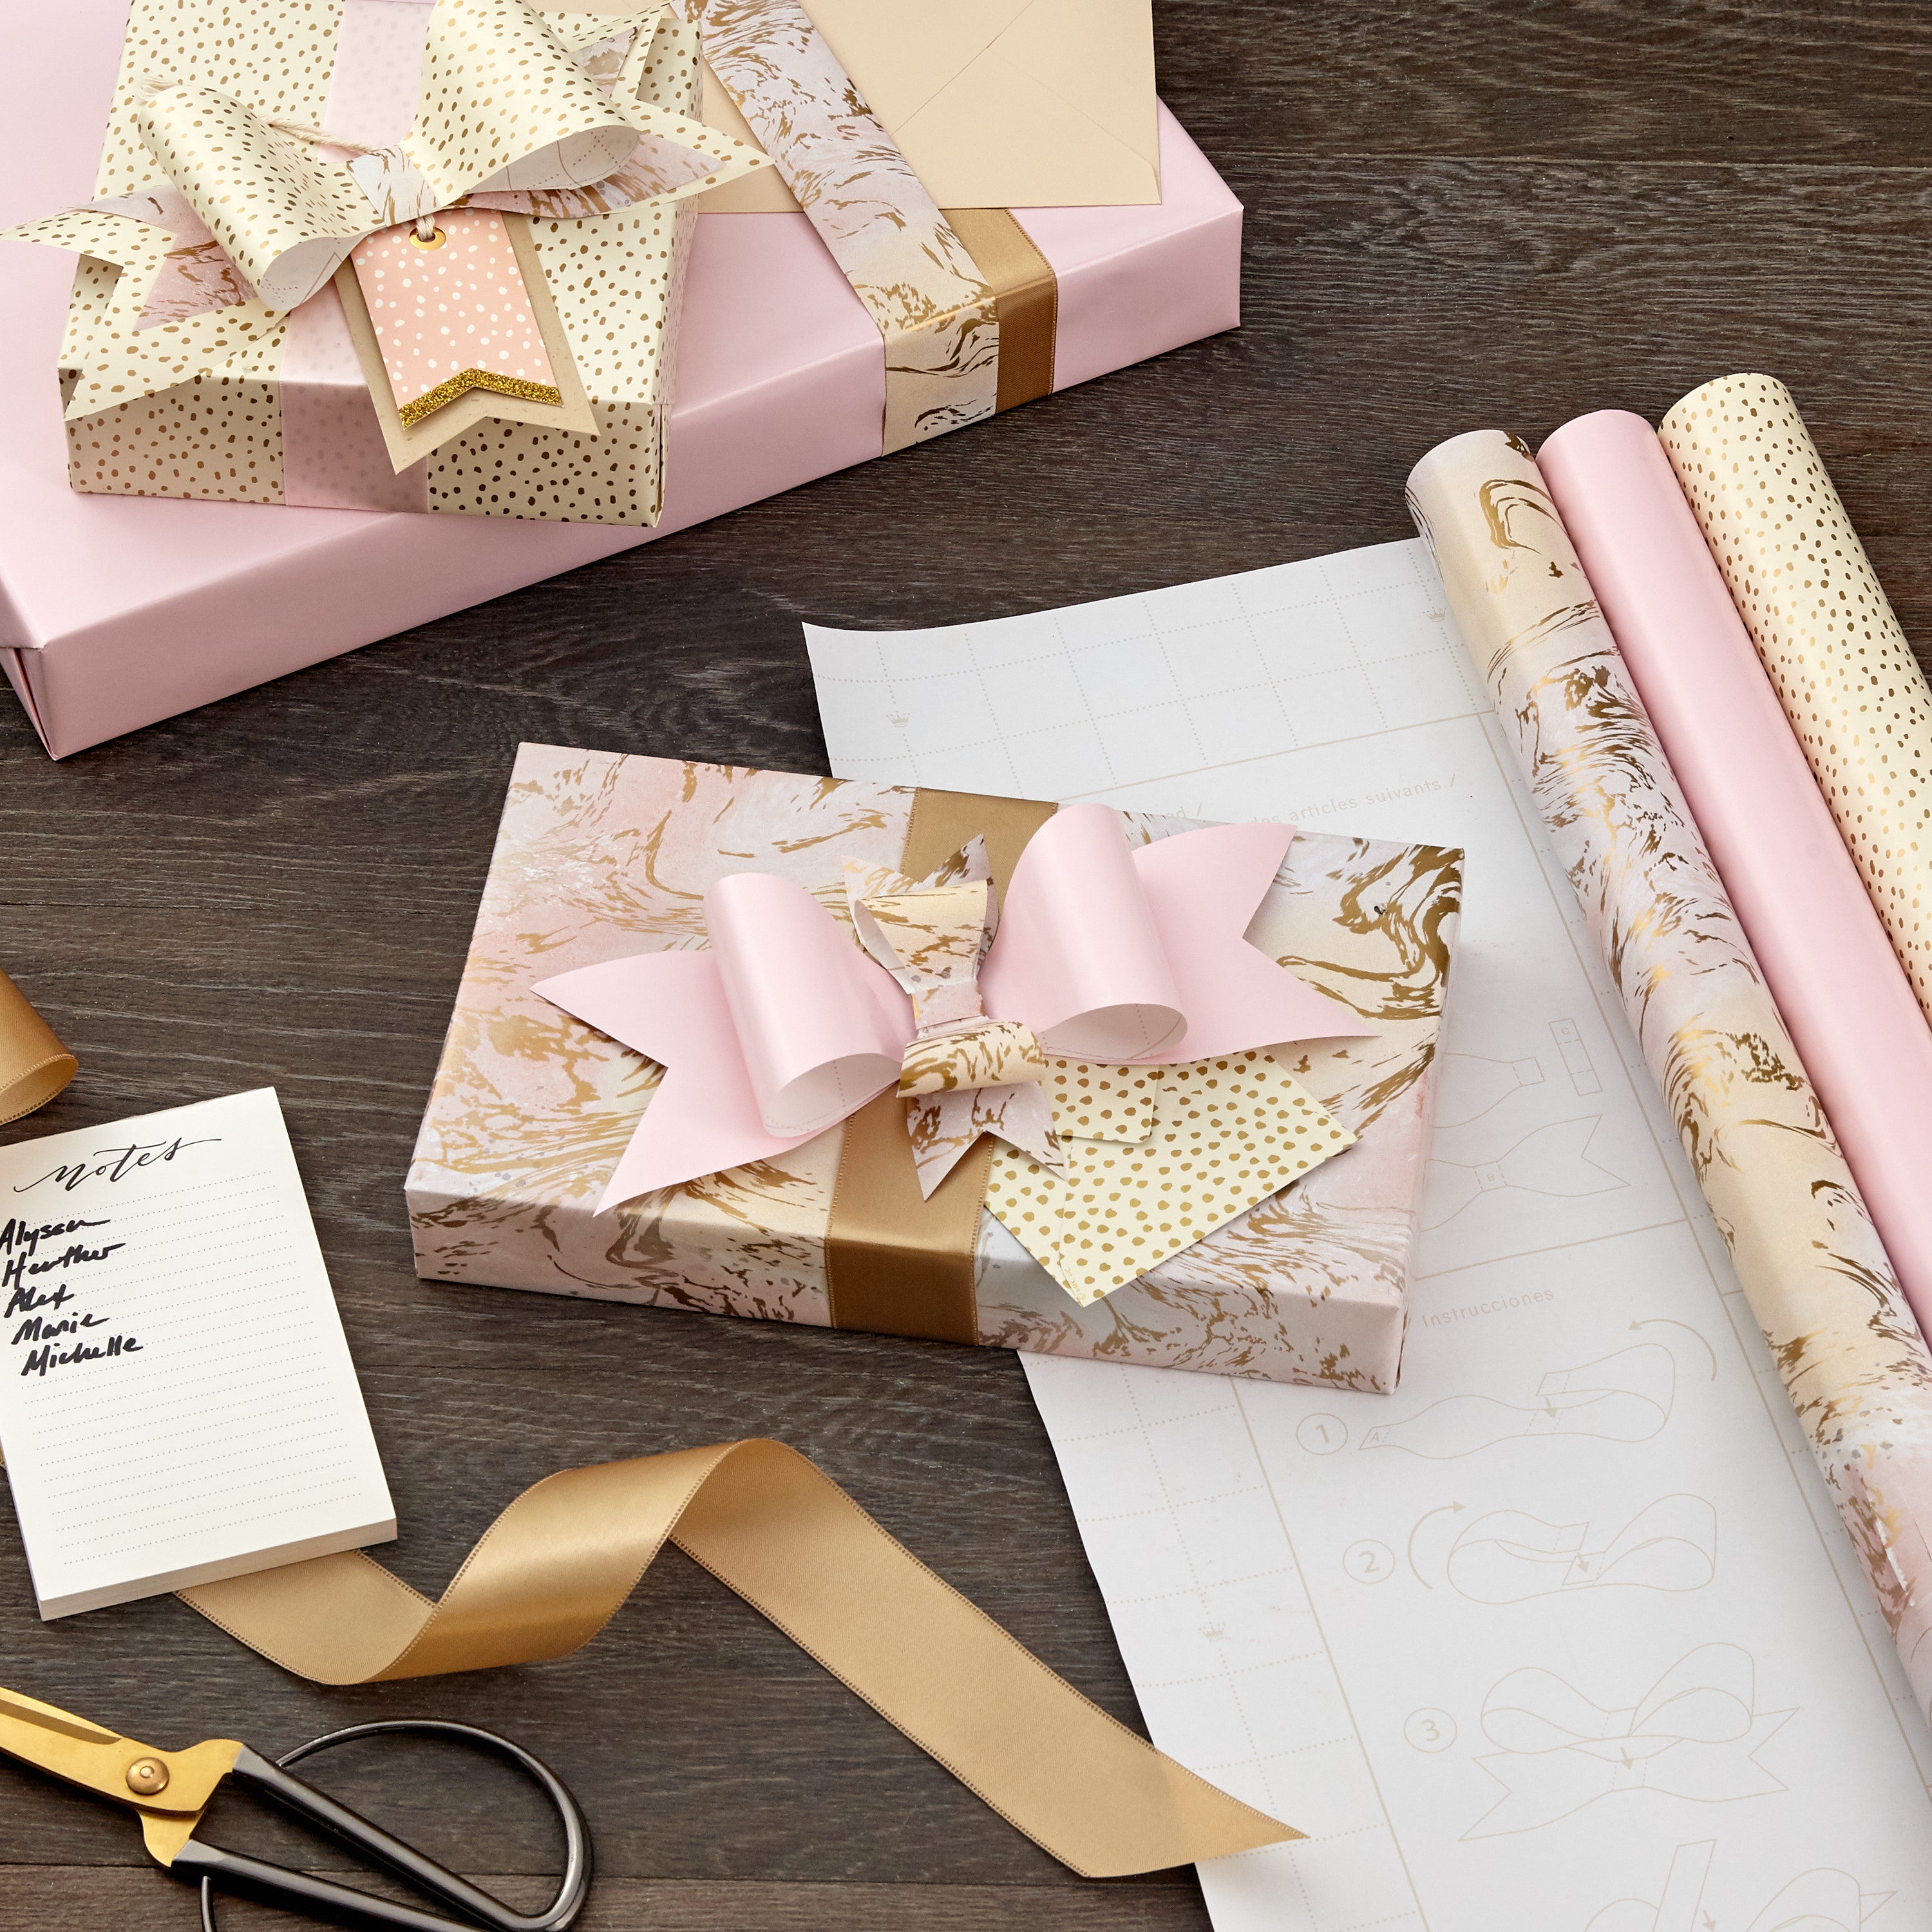 Hallmark Pink and Gold Wrapping Paper with DIY Bow Templates on Reverse (3-Pack: 75 sq. ft. ttl) for Birthdays, Weddings, Bridal Showers, Crafts